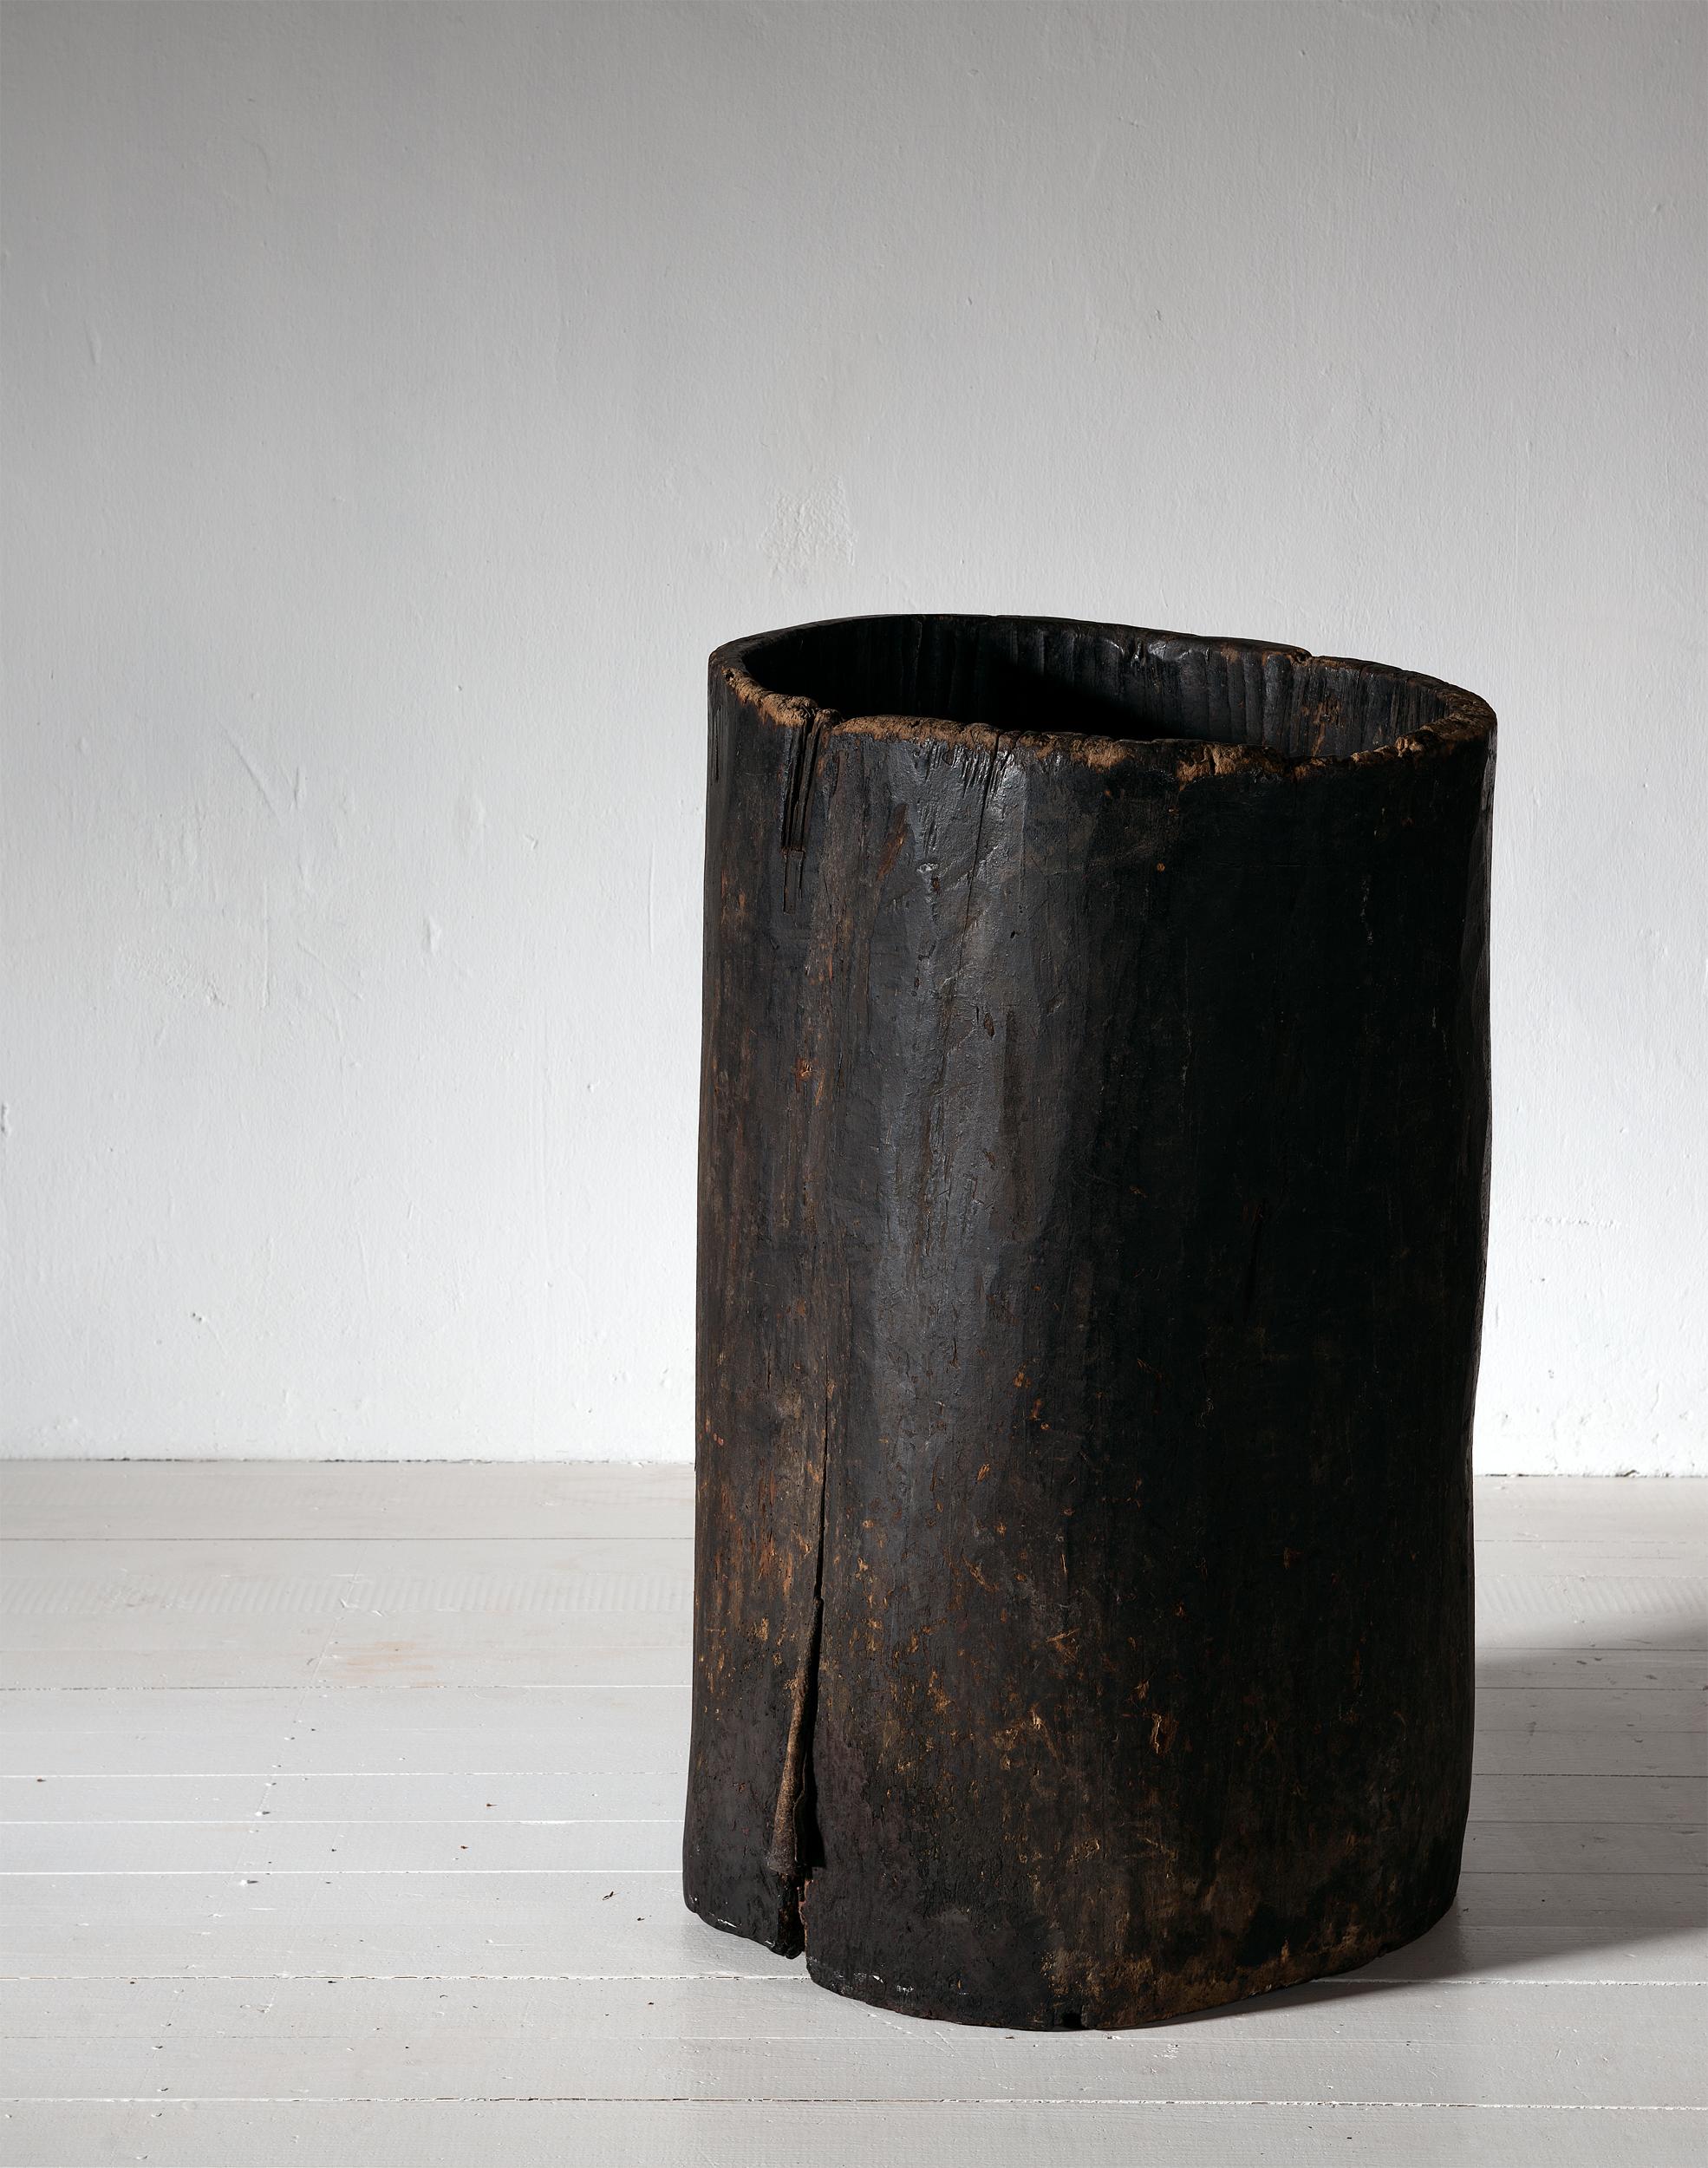 An early 19th century large grain storage barrel, carved from a whole tree trunk, of natural tapering cylindrical form. 
Perfect for use as a planter or for walking sticks and umbrellas, or just as beautiful, organic sculpture in a modern or